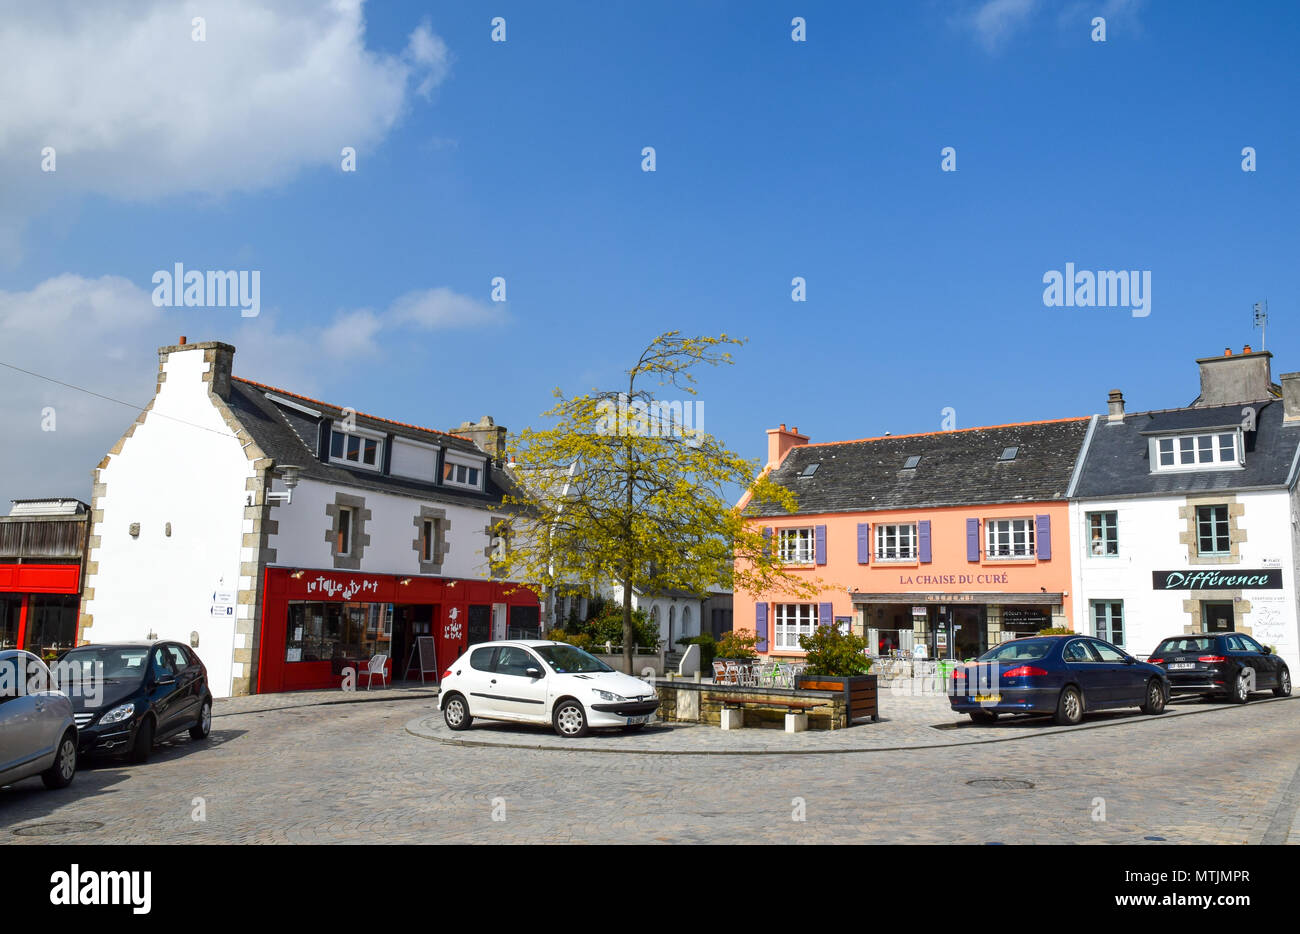 Restaurants serving gourmet food & an art gallery are clustered on a colourful corner in Carantec, Brittany, France. Stock Photo